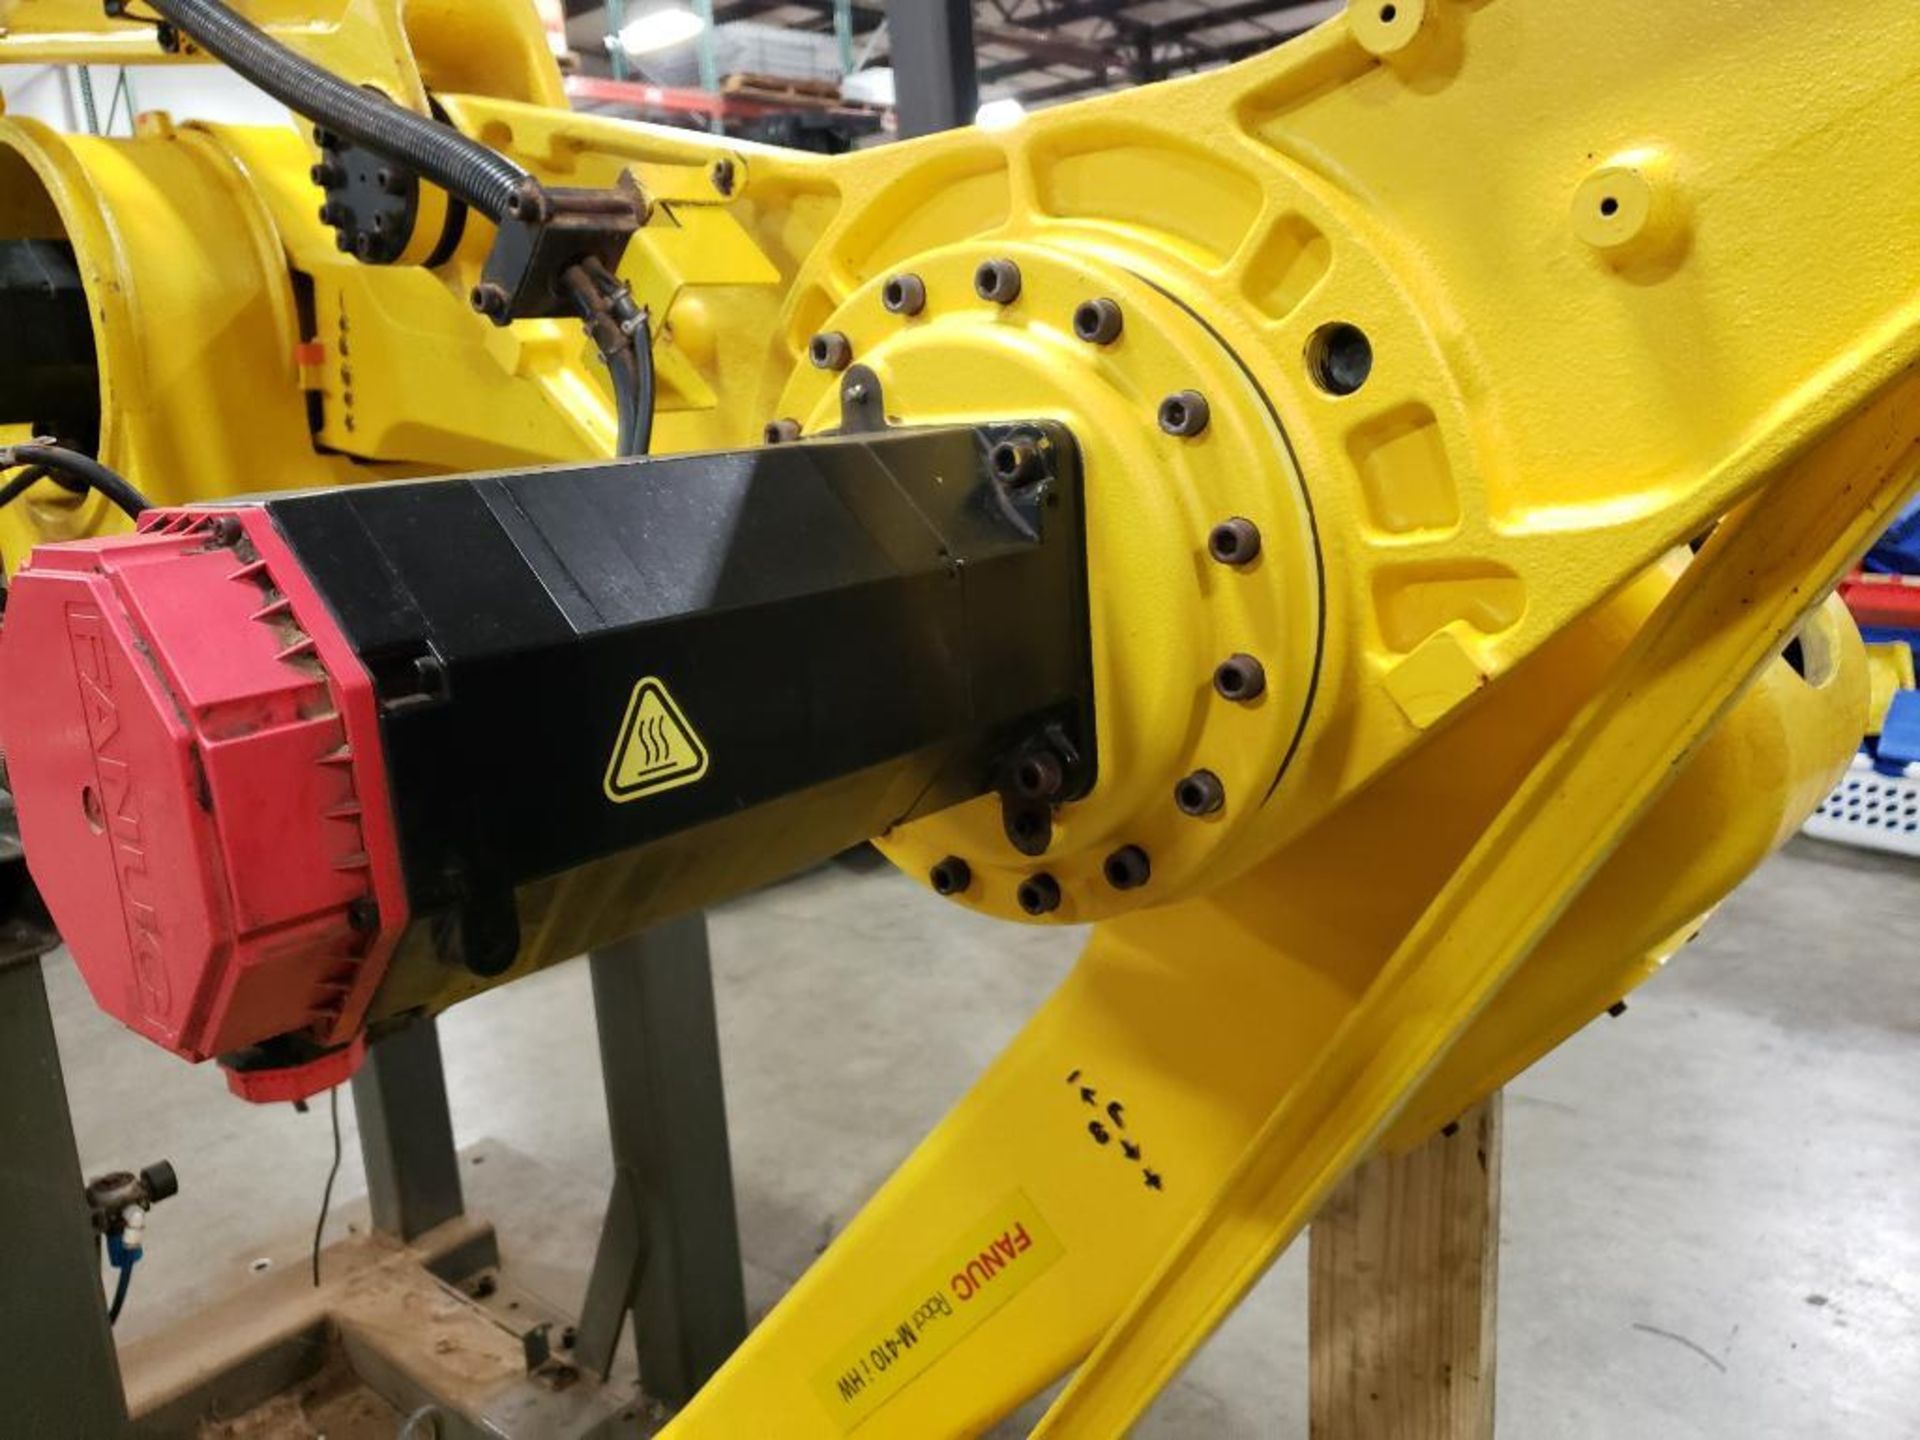 Fanuc M-410i HW robot arm. Does not include controller or cables. (cables have been cut) - Image 12 of 27